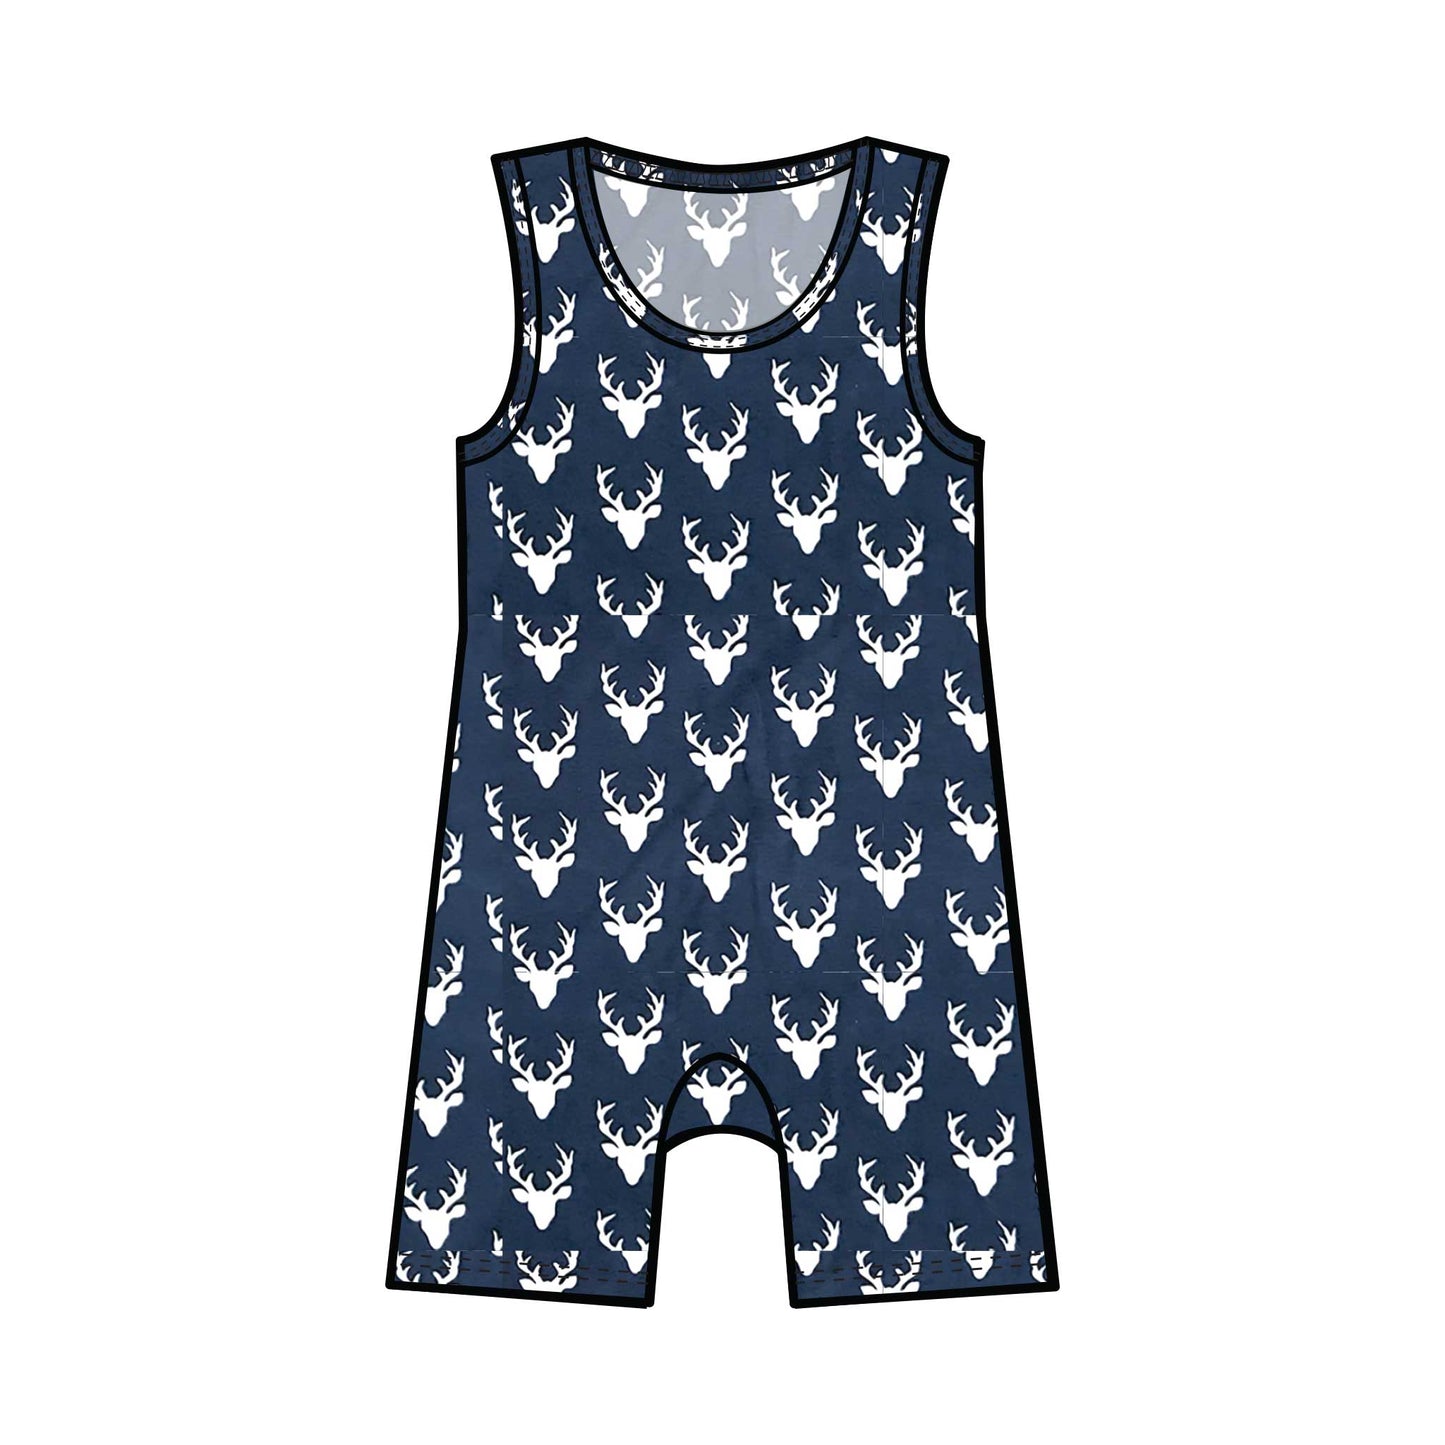 Summer Tank Baby Rompers | Various Fun Cotton Knit Prints-Baby One-Pieces-0-3 months-Deer Silhouettes-Hagsters